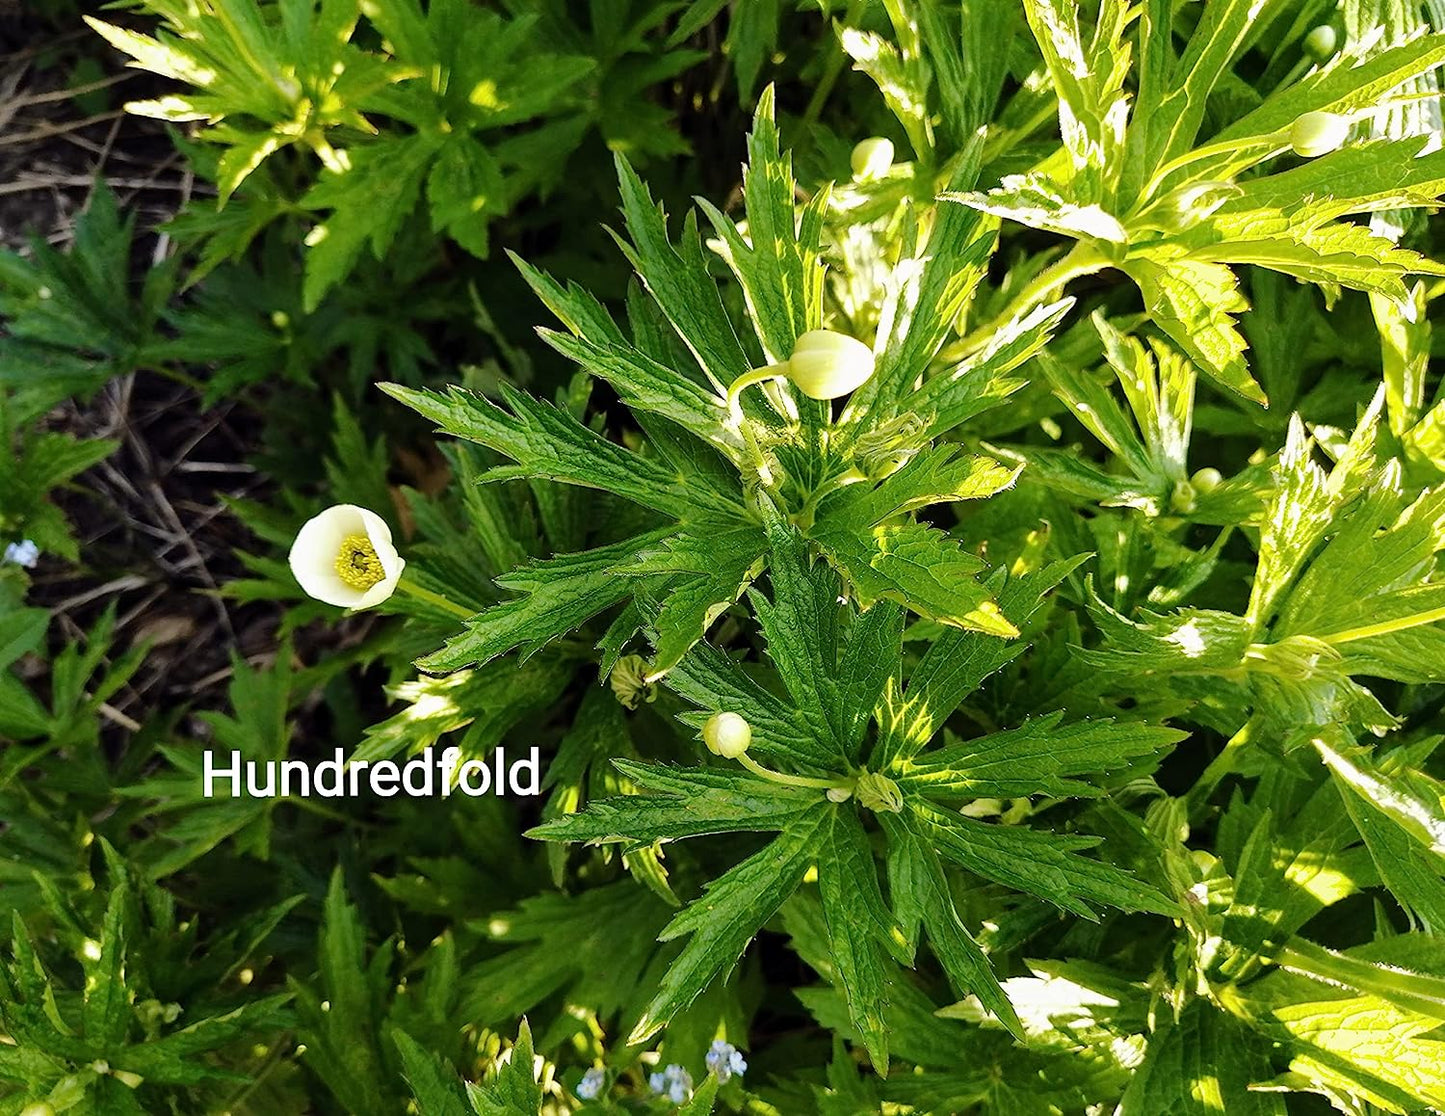 Hundredfold Canadian Anemone 100 Flower Seeds – Anemone Canadensis Native Flower Round-Leaf Thimbleweed Ground Cover and Lawn Alternative for Shade Areas